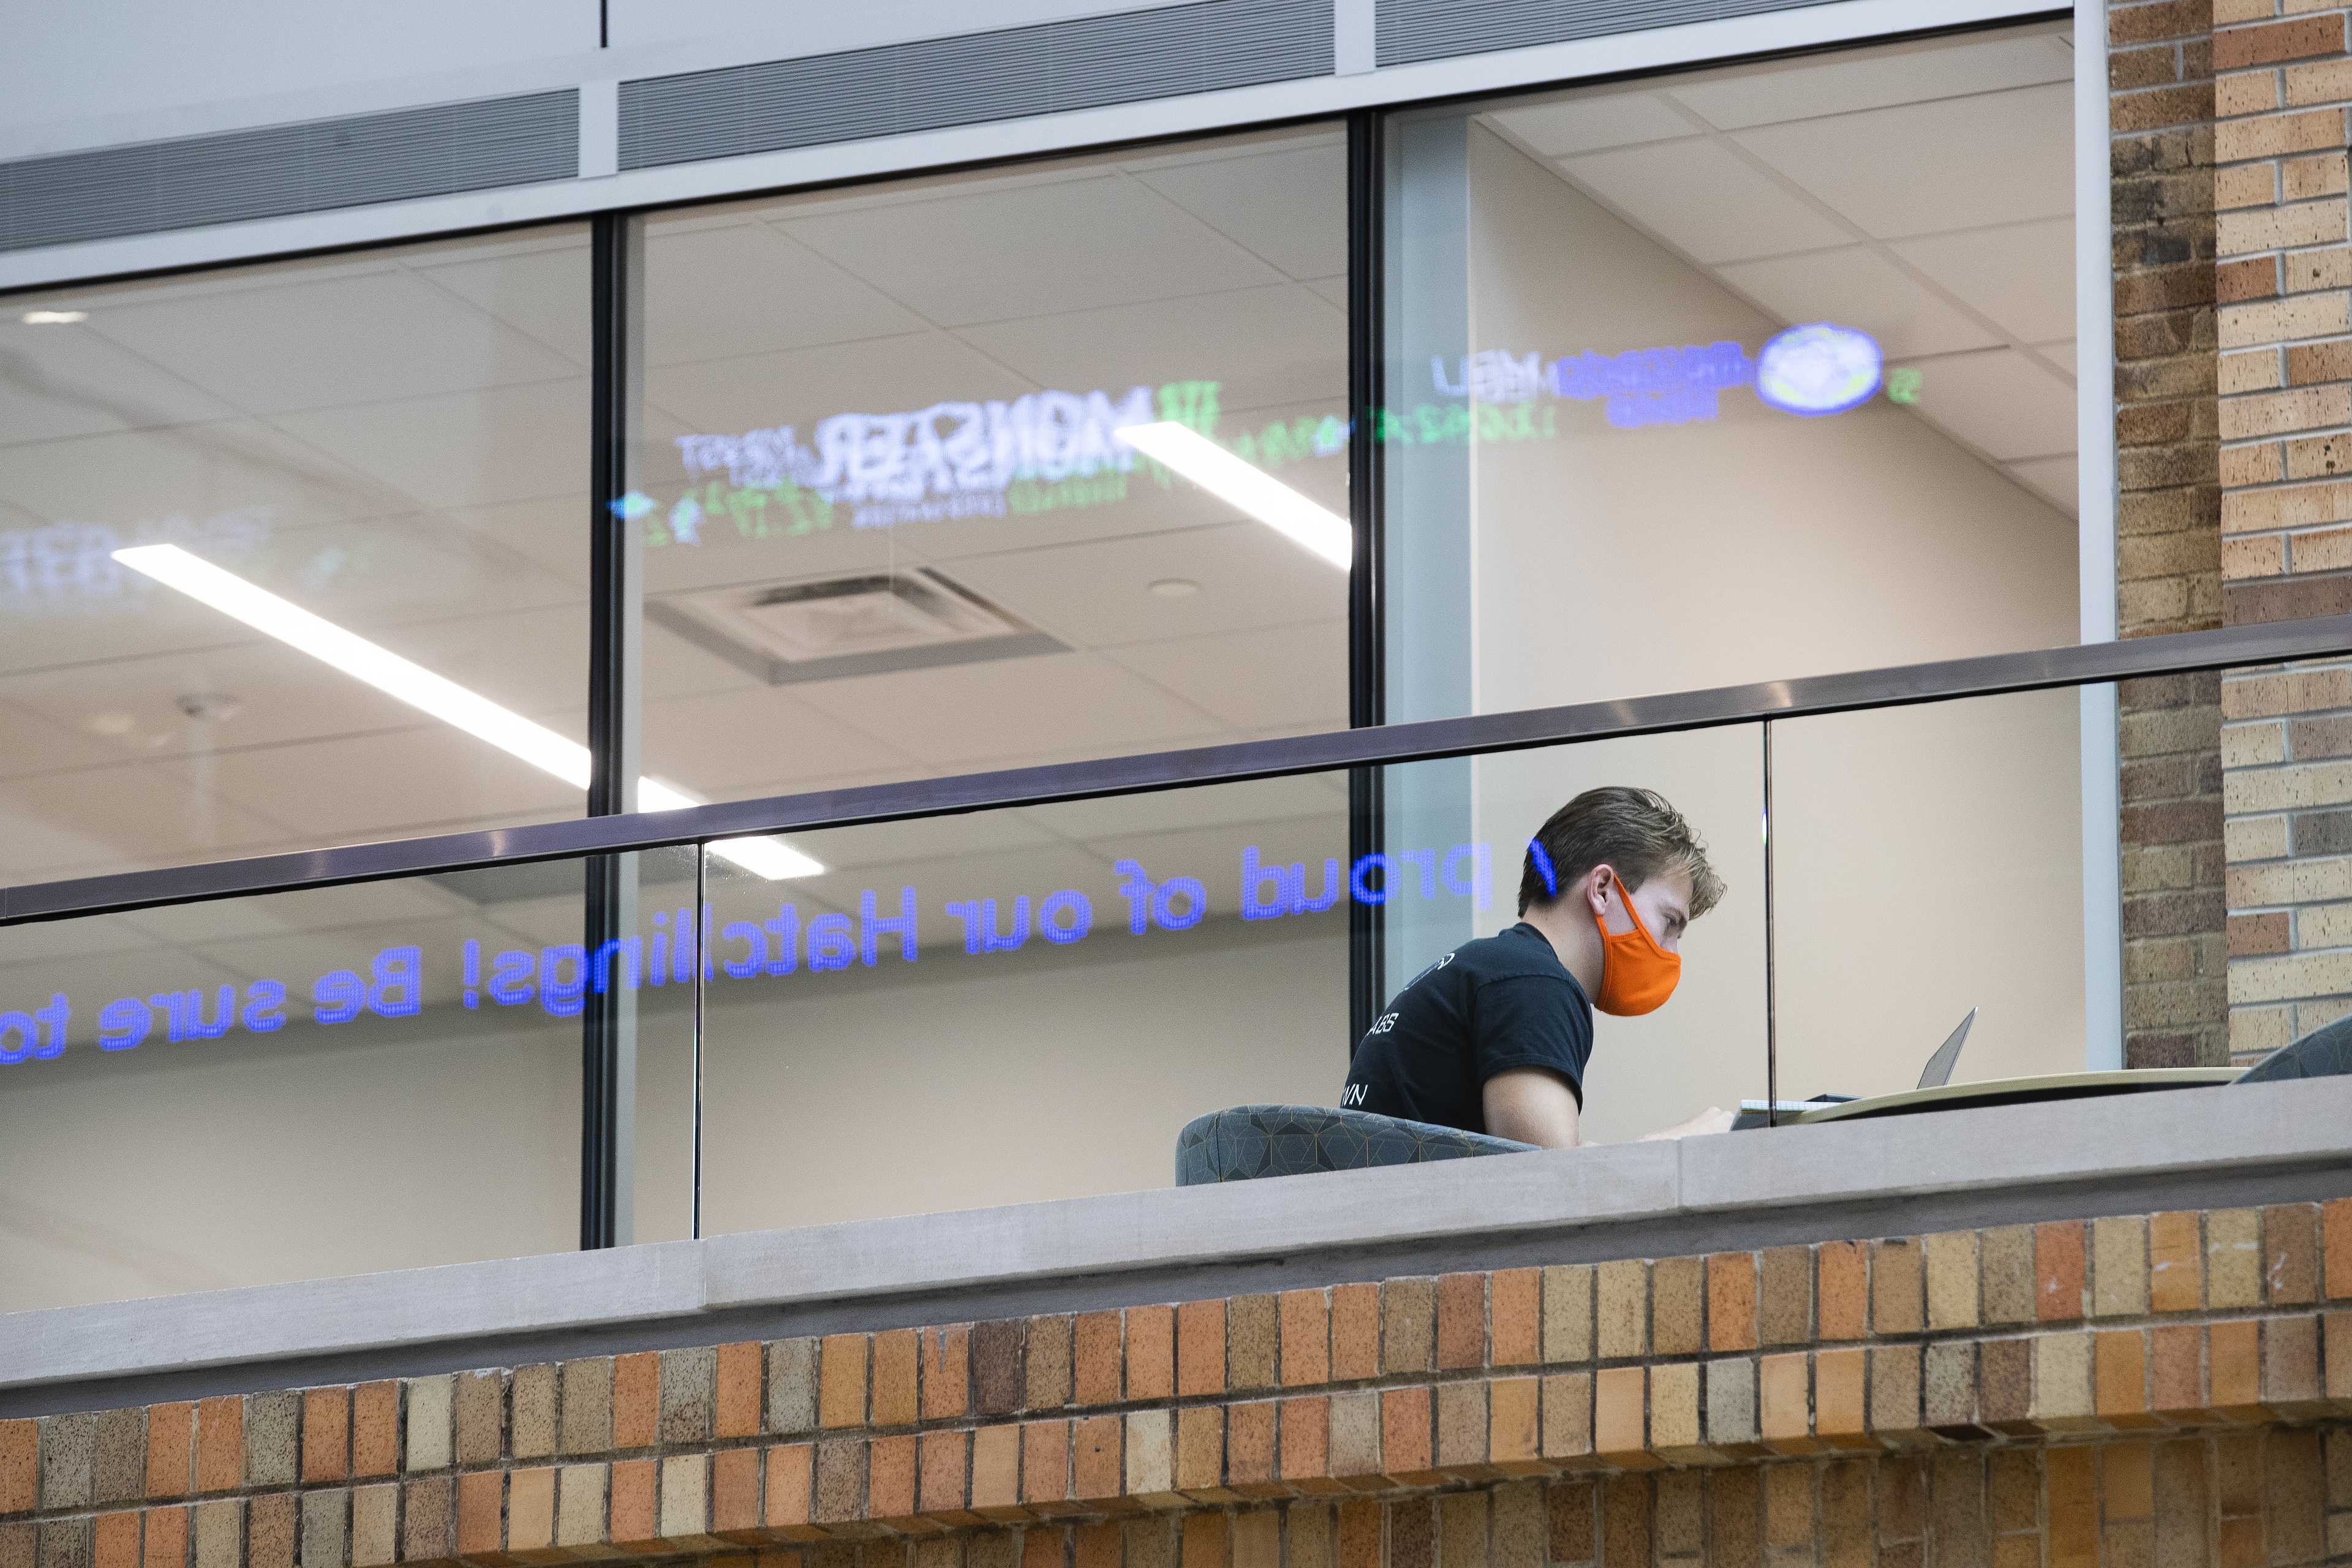 The Maurer Center’s scrolling news and stock ticker reflects on the glass while A. J. Mahnke, a sophomore finance major from Archbold, Ohio, studies.